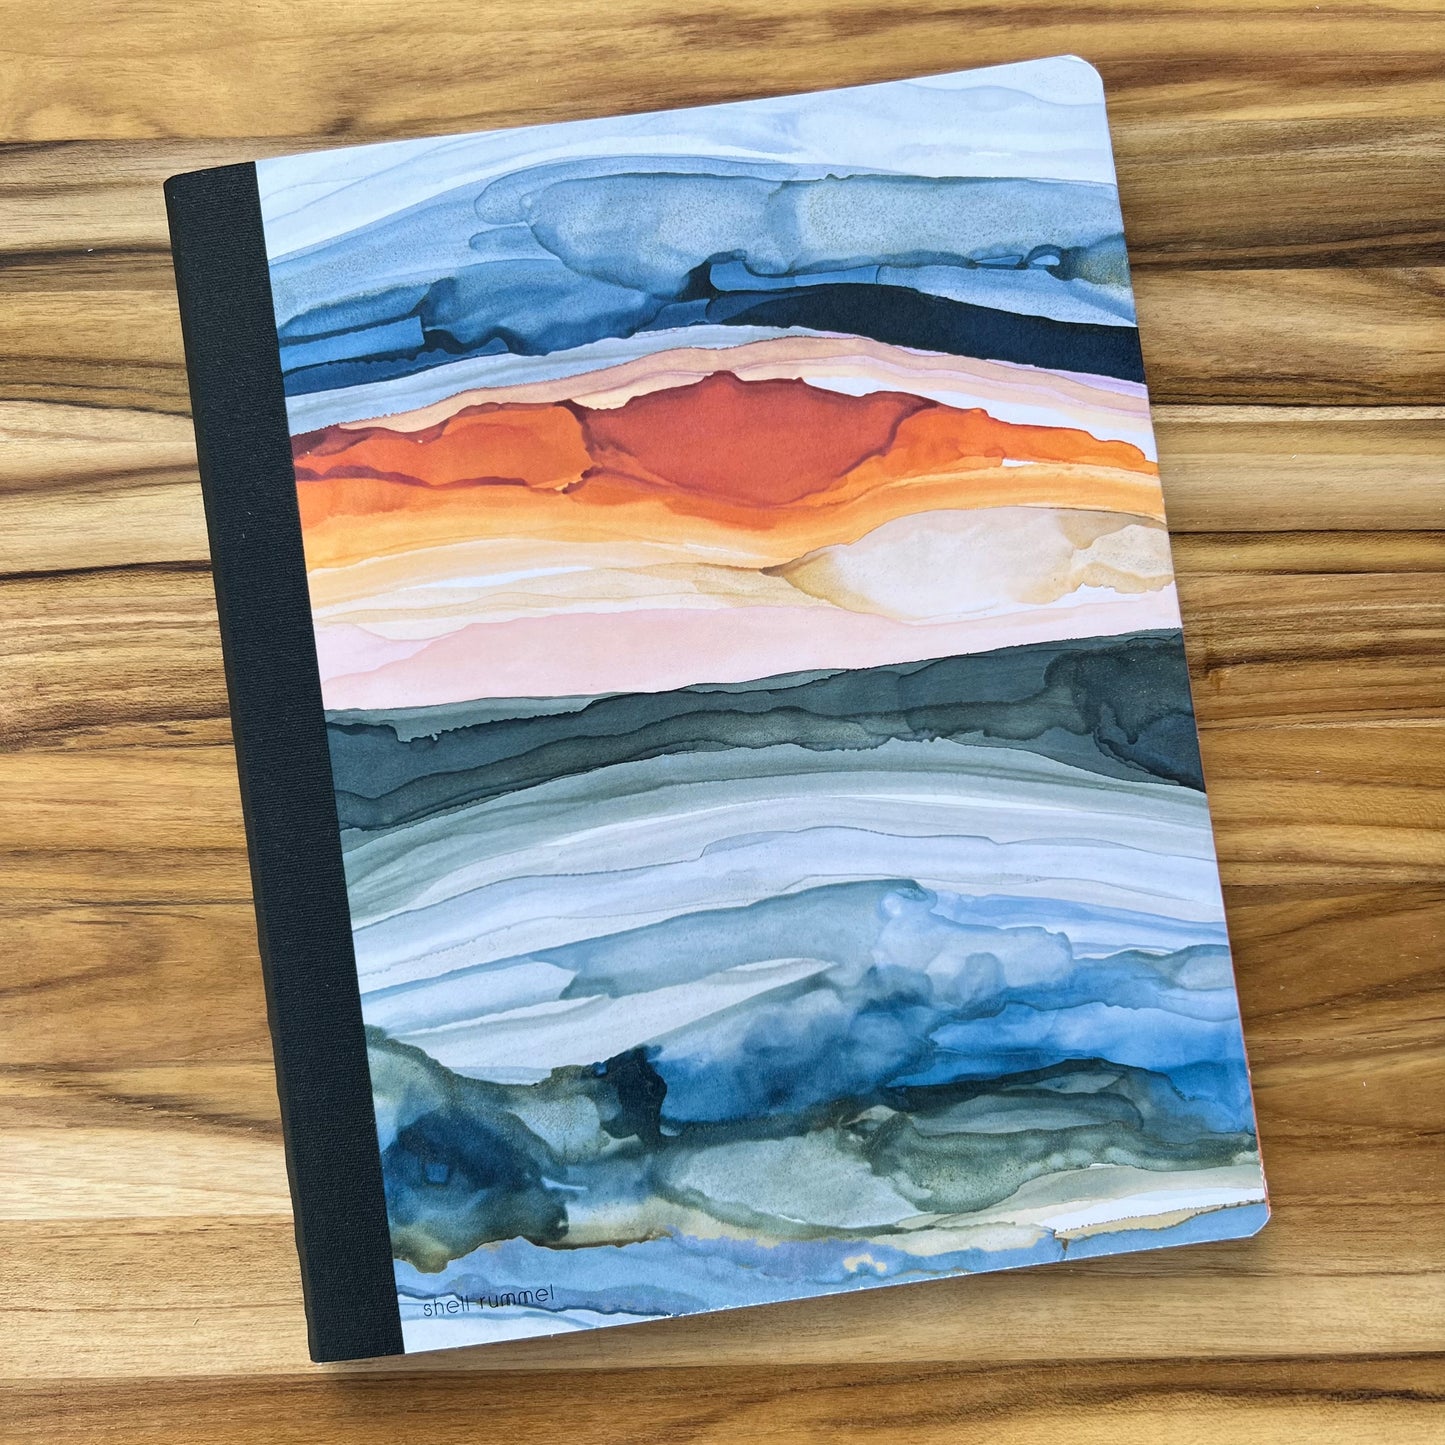 notebook with abstract sunrise design printed on the cover.